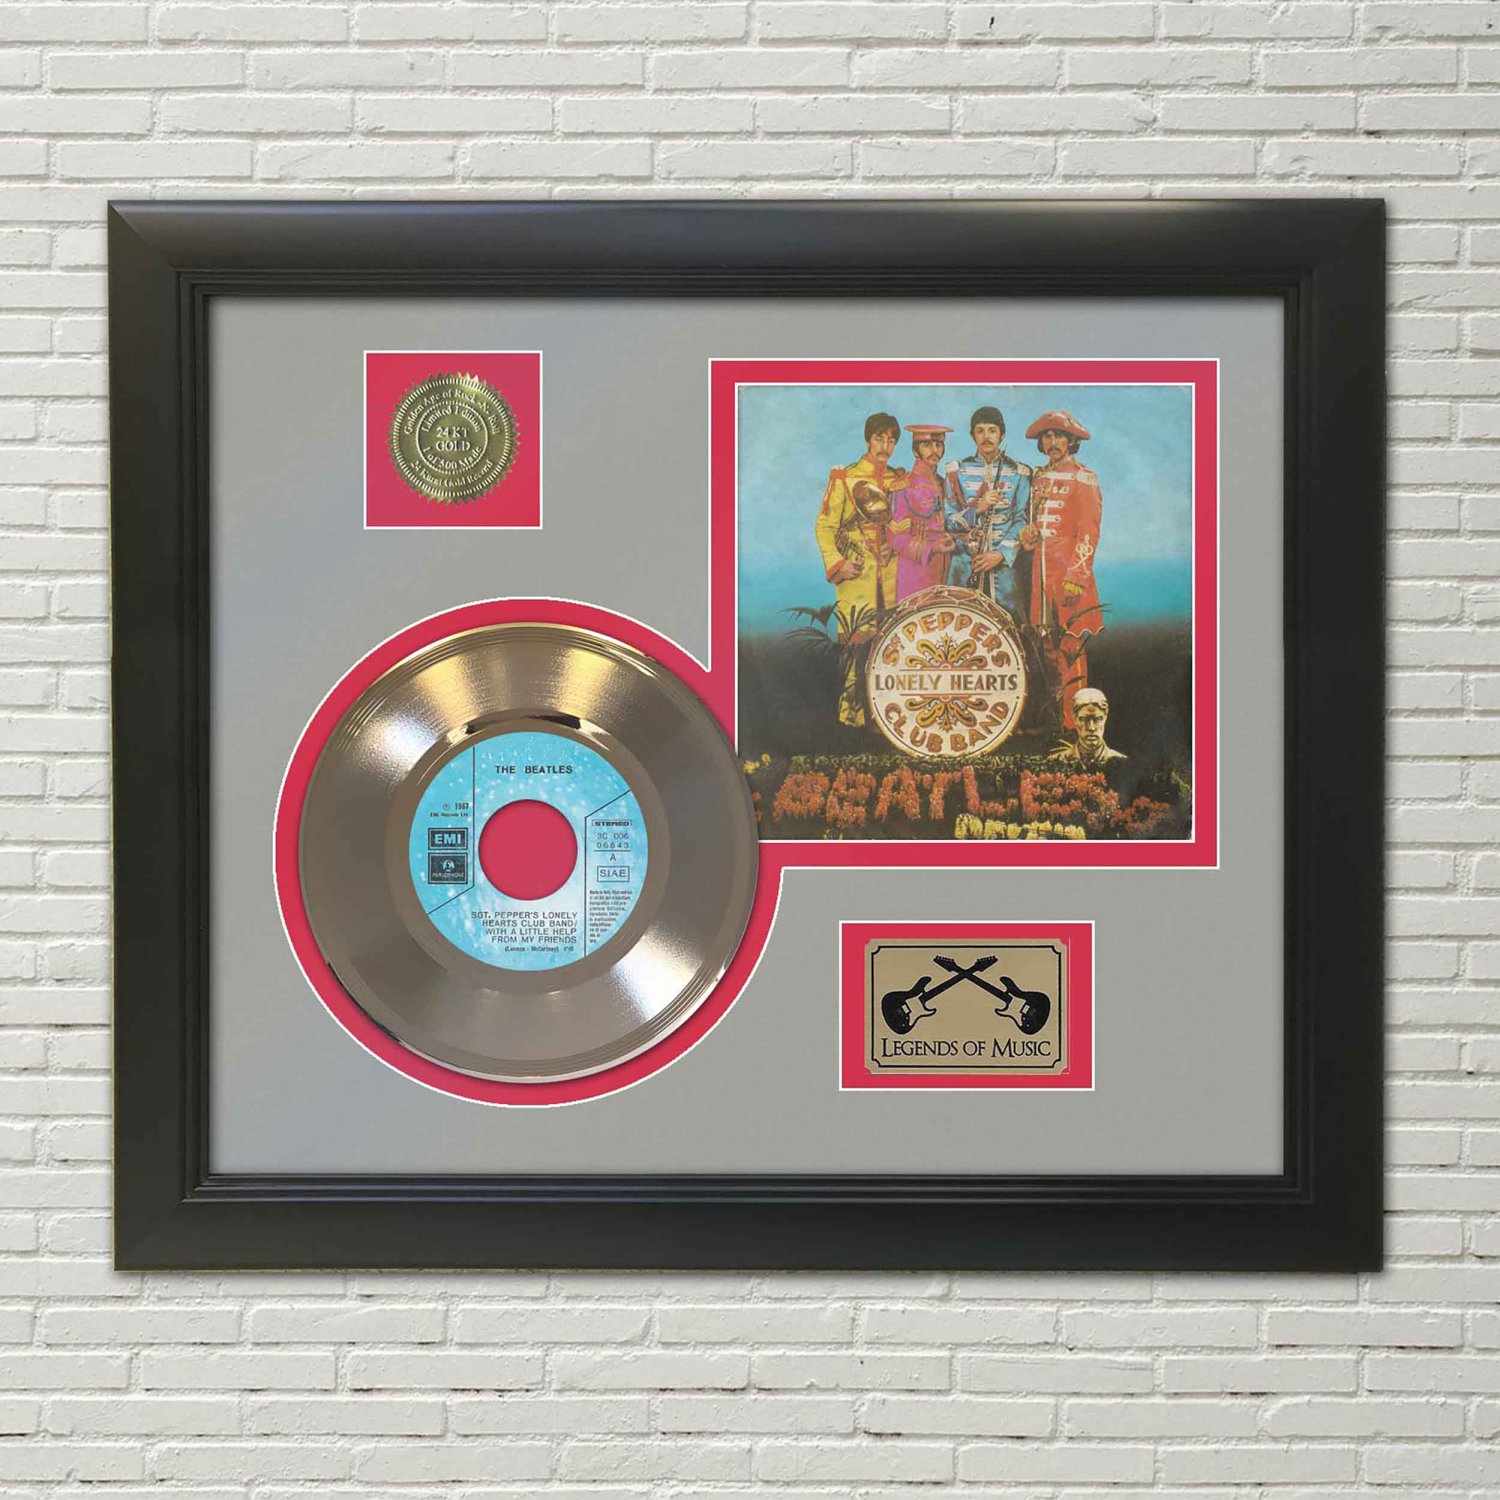 THE BEATLES "Sgt. Pepper's" Framed Picture Sleeve Gold 45 Record Display